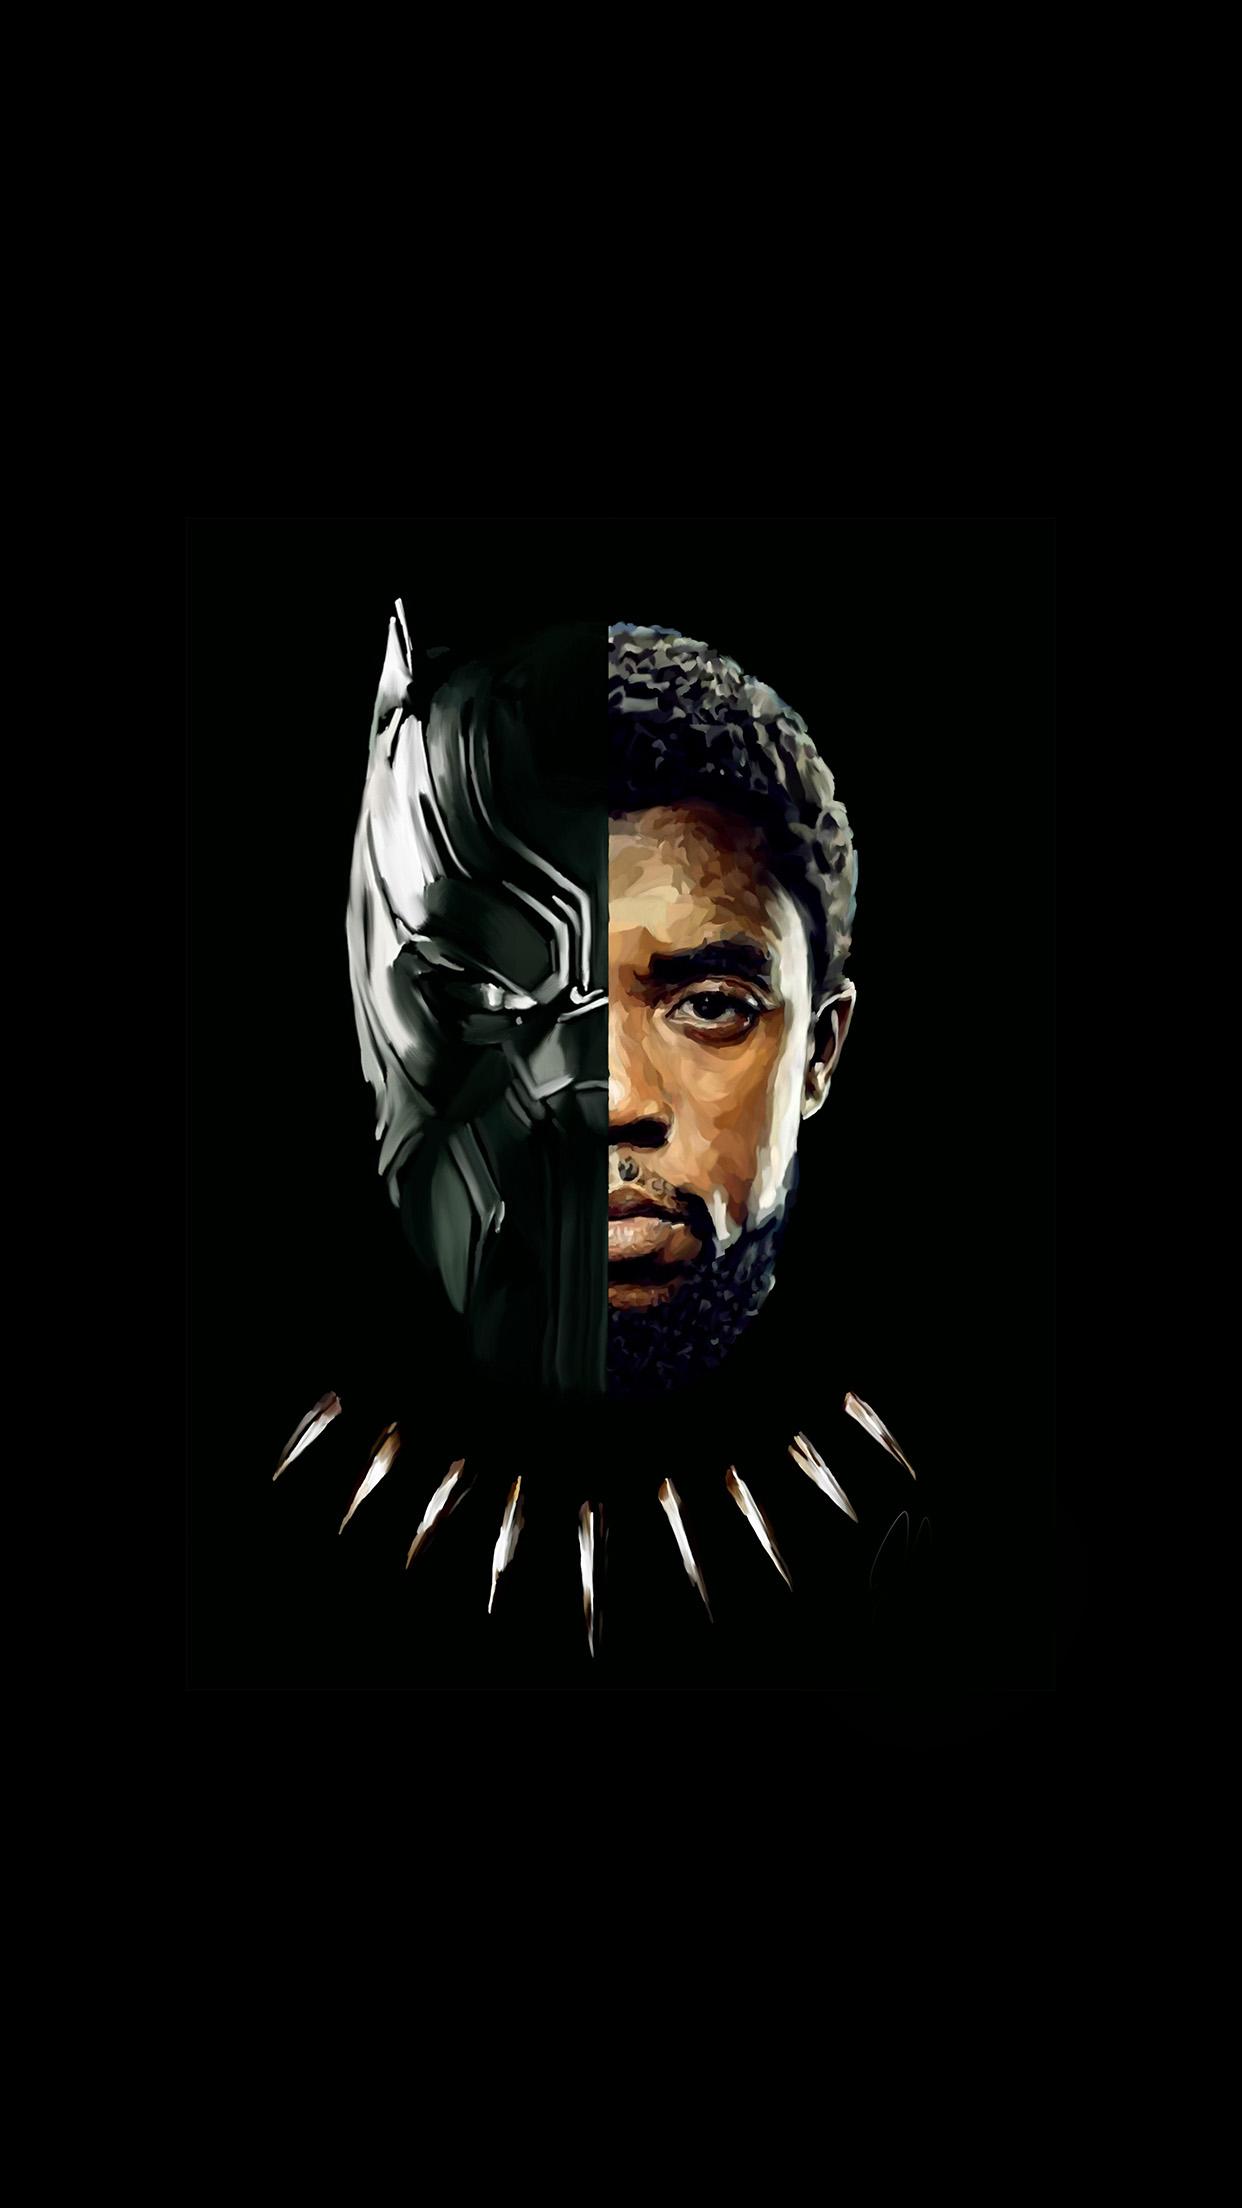 Black Panther HD iPhone Wallpapers - Wallpaper Cave